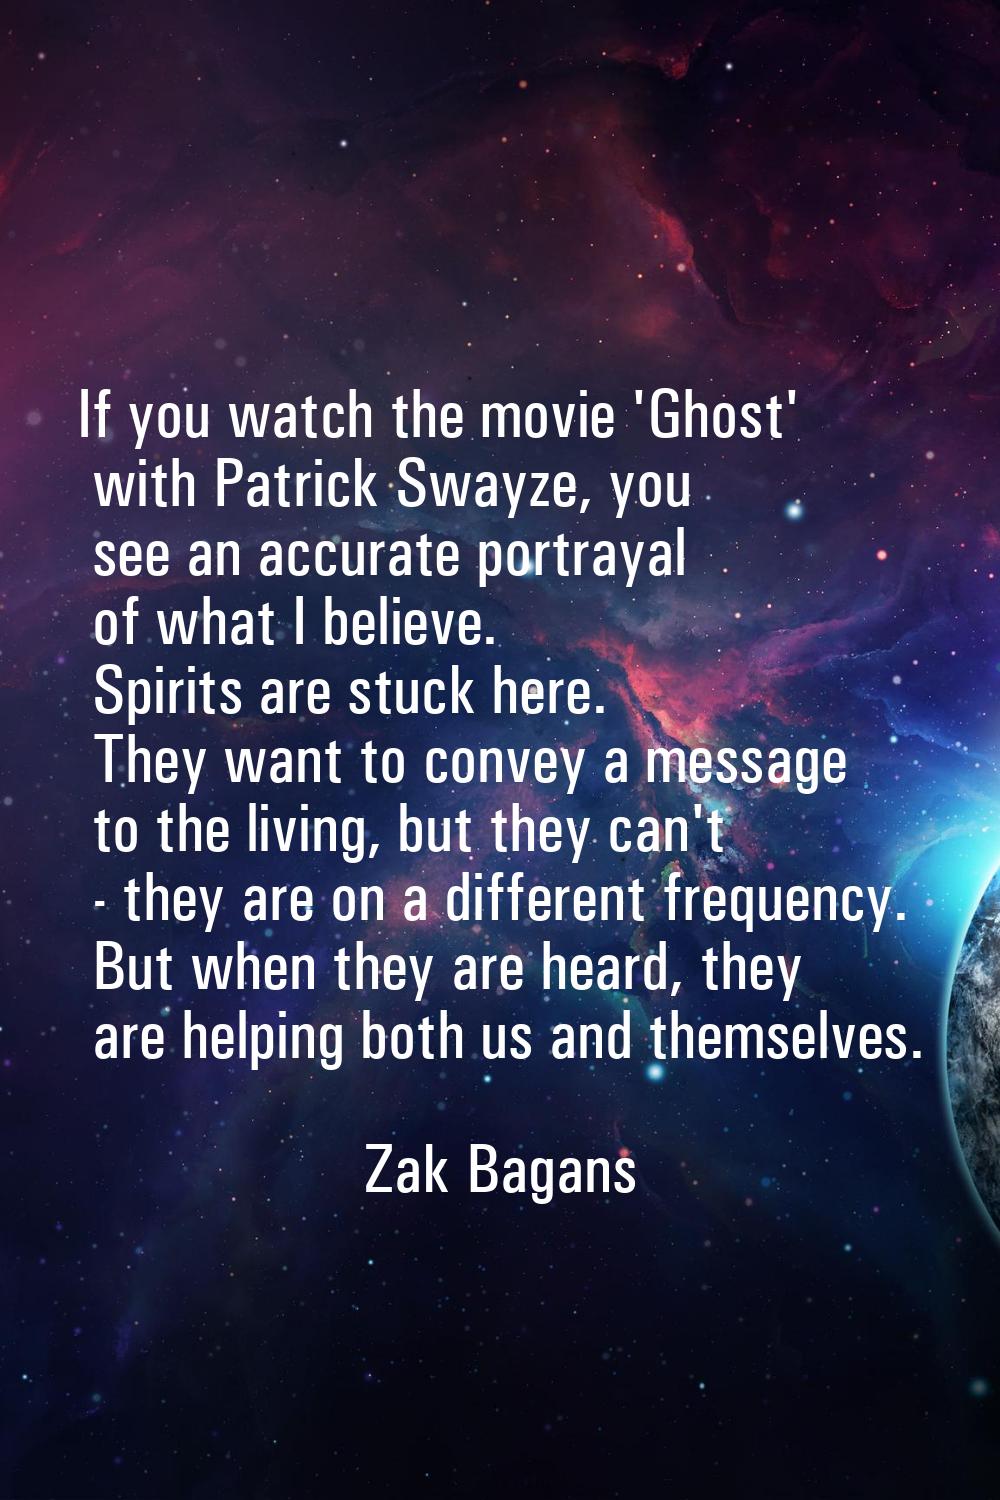 If you watch the movie 'Ghost' with Patrick Swayze, you see an accurate portrayal of what I believe